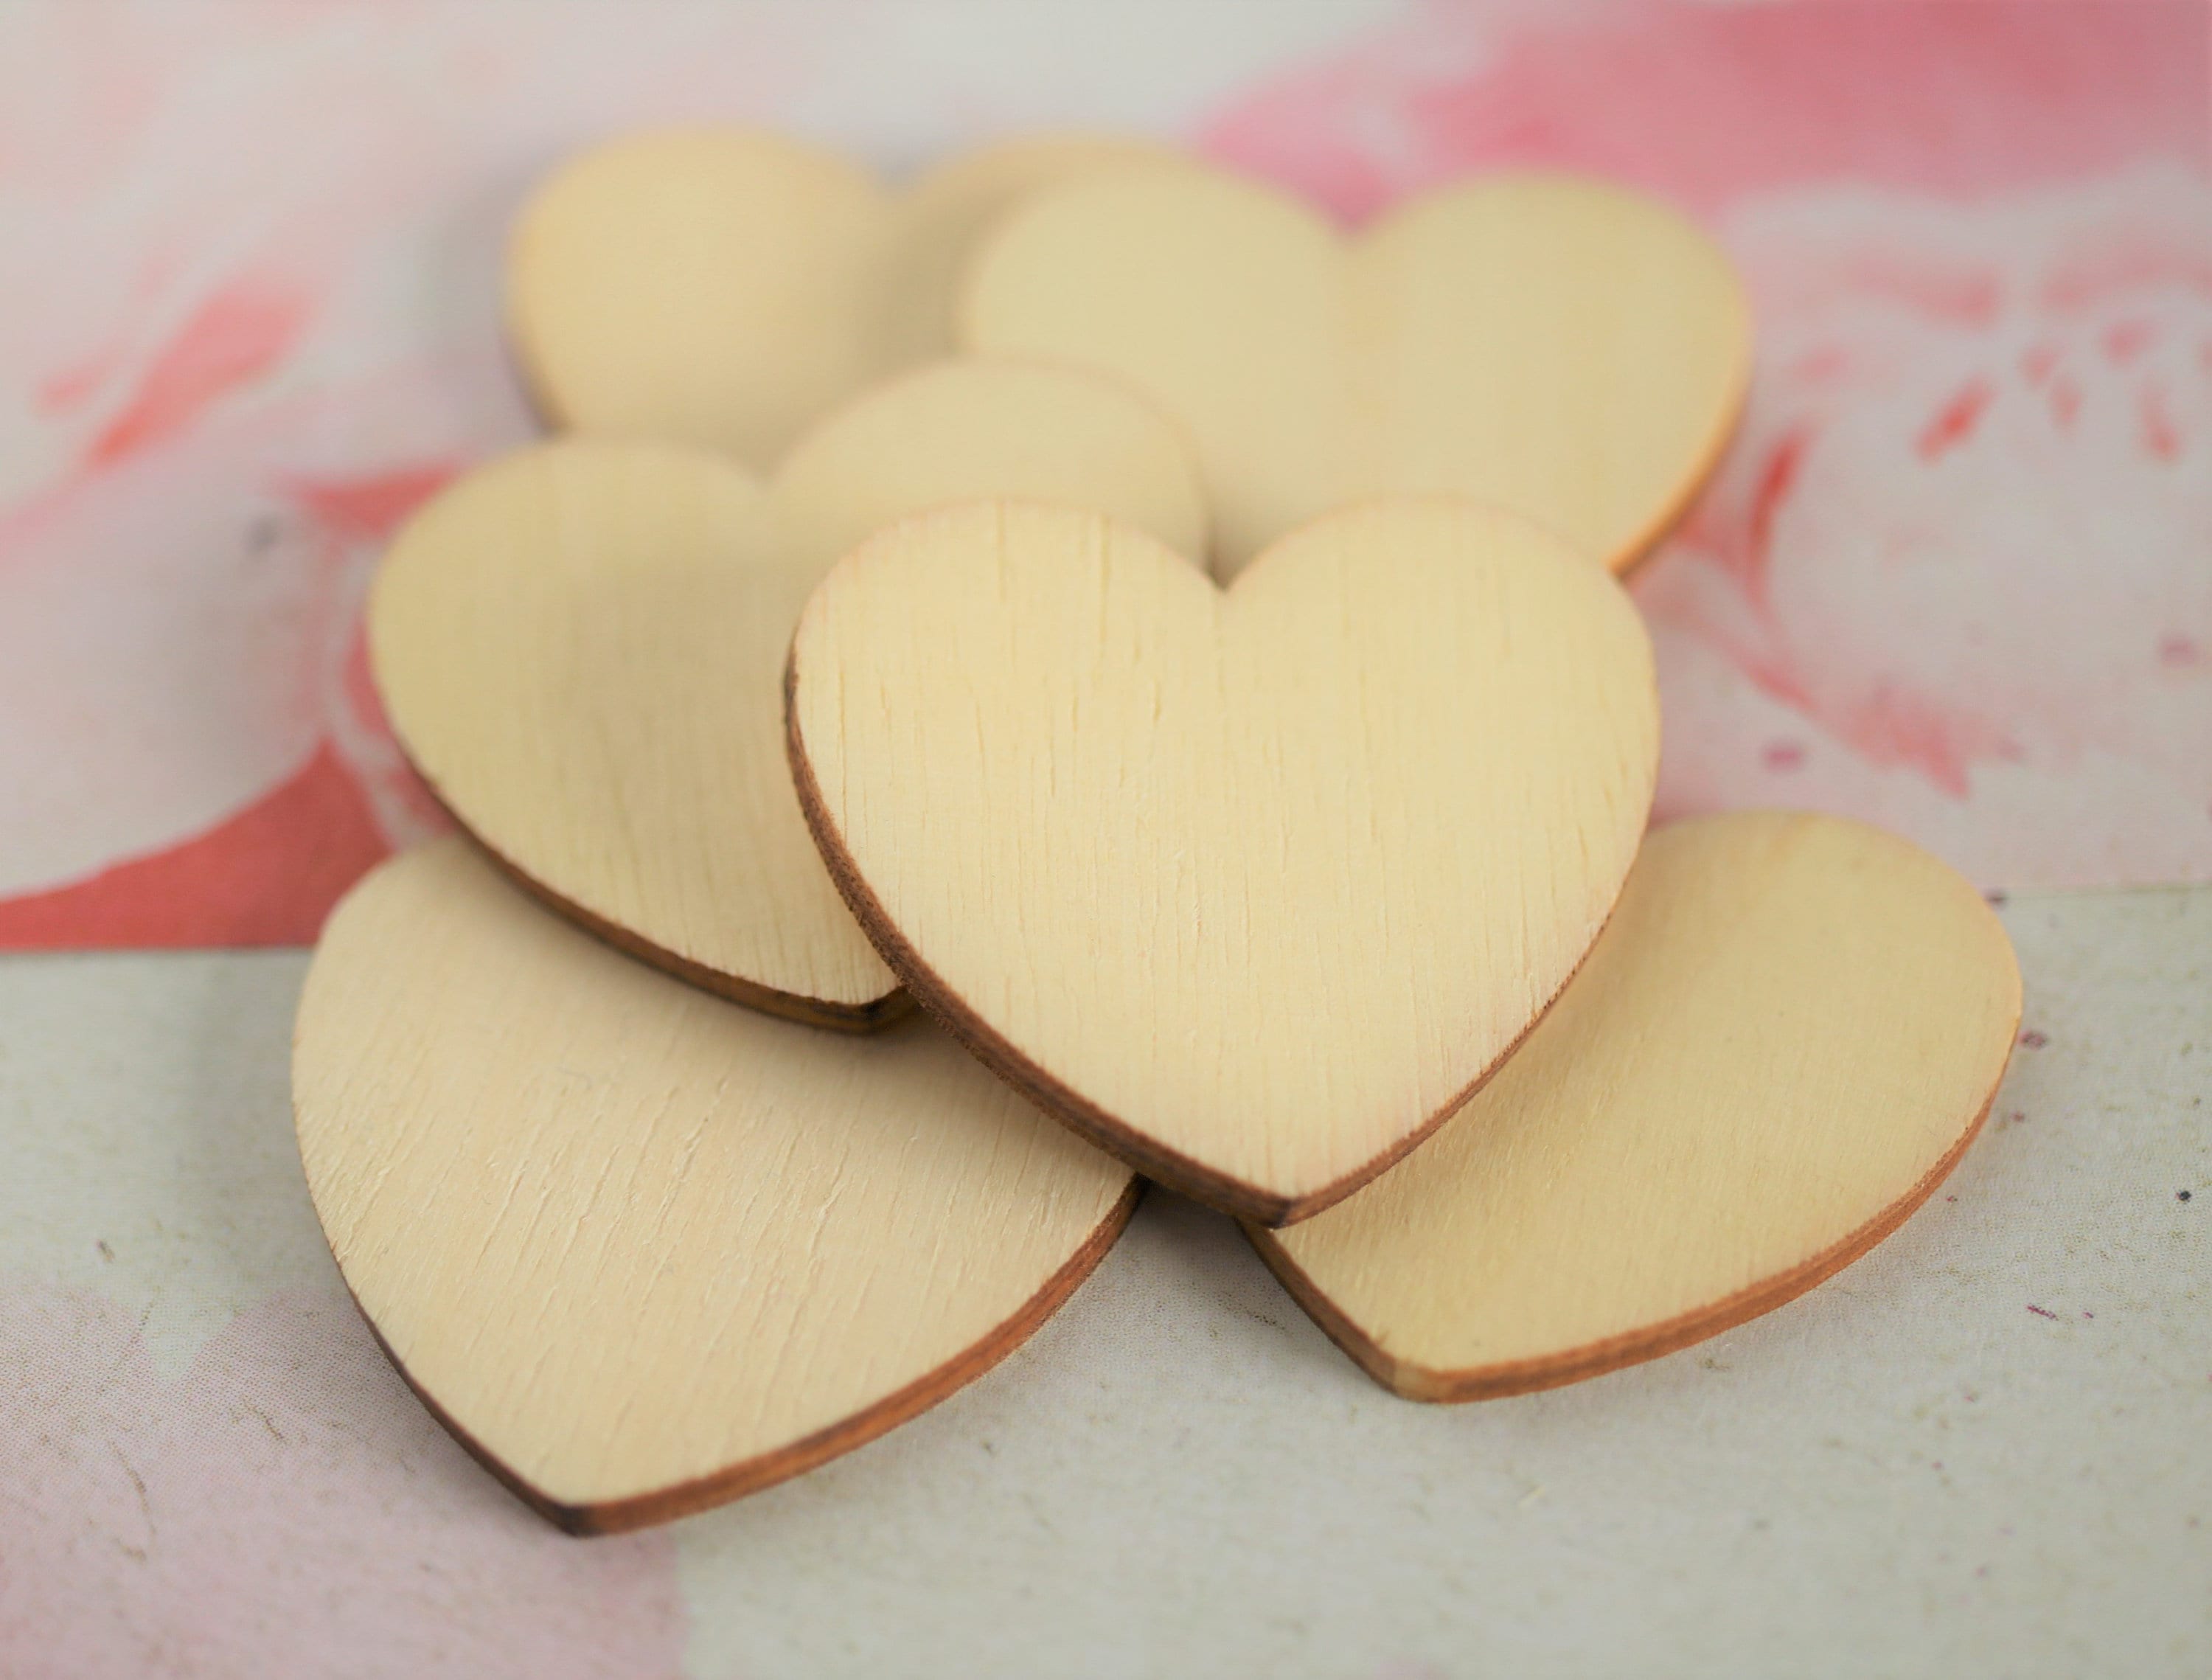 Wooden Hearts, 37 X 32 Cm, Wooden Cut Outs,, Mini Figures,, Valentins Day,  Wedding 